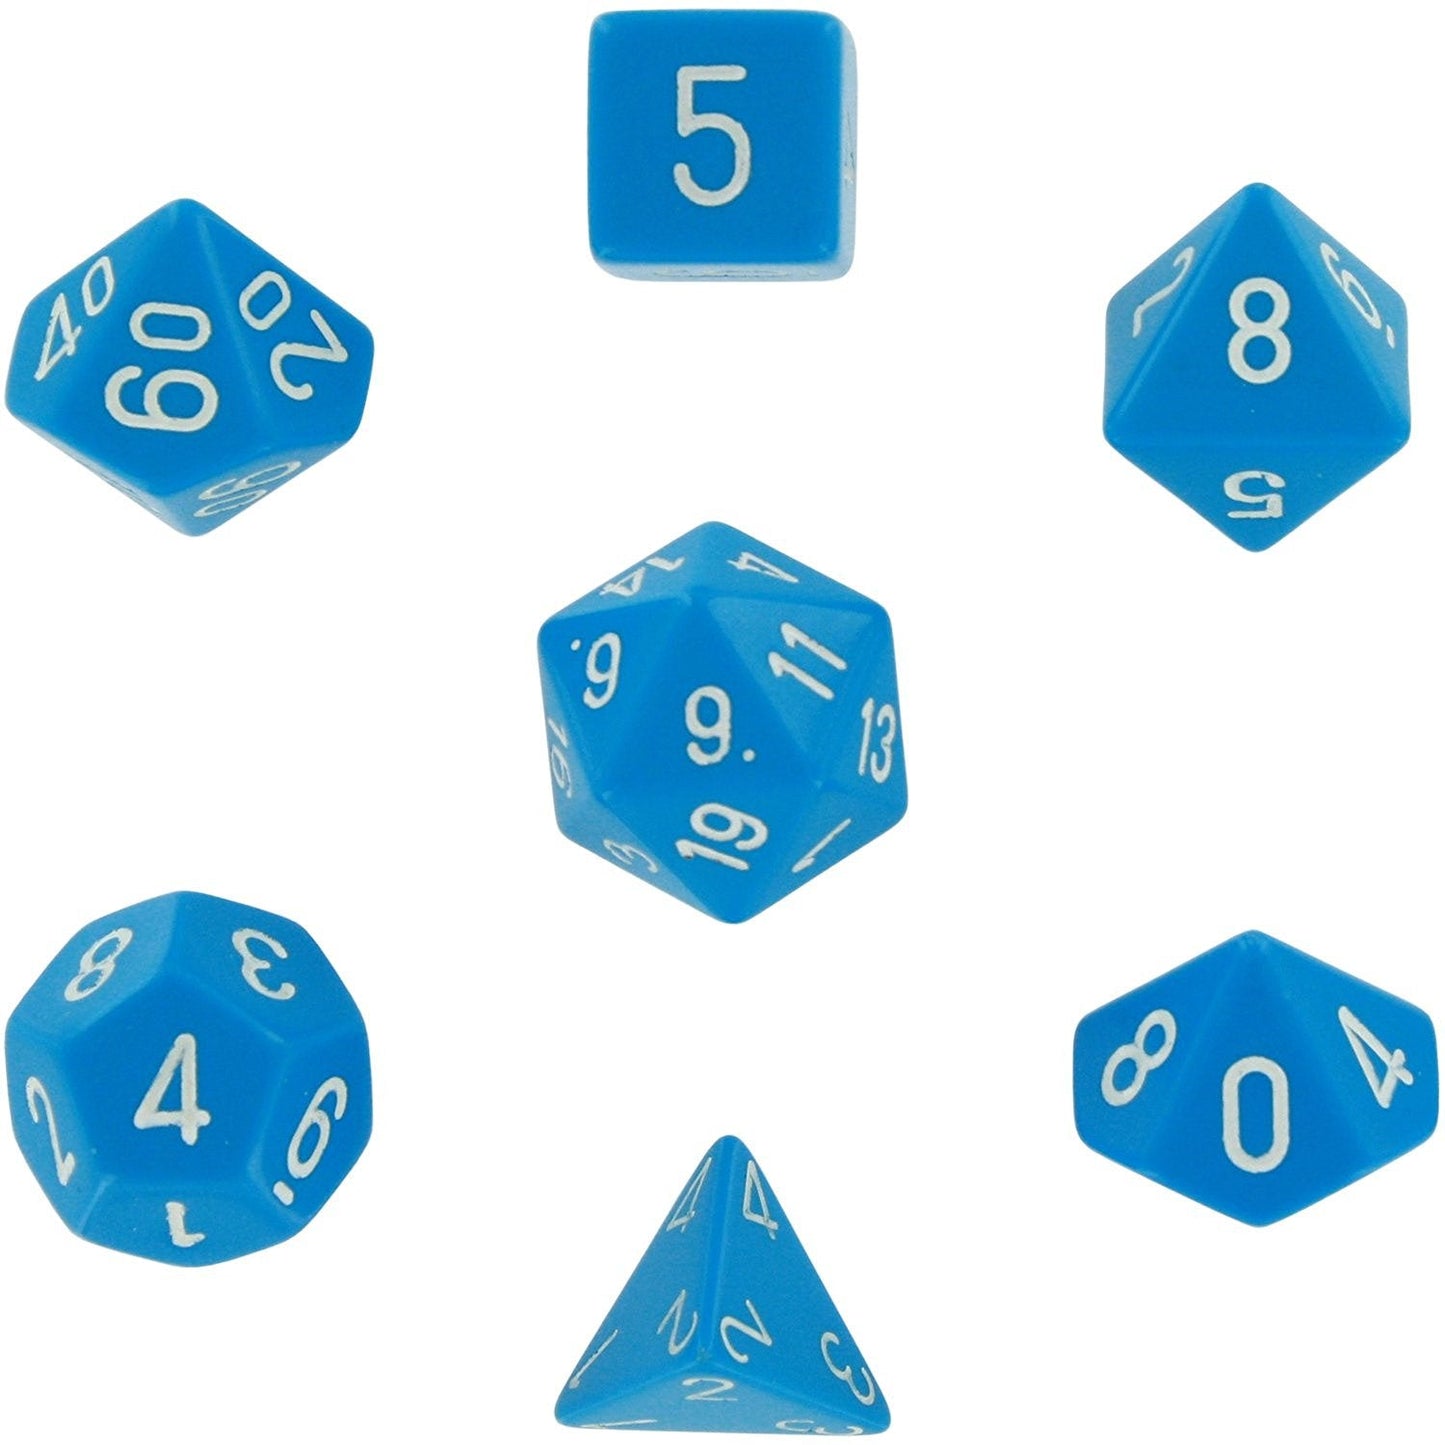 Chessex Dice: 7 Die Set - Opaque - Light Blue with White (CHX 25416) - Gamescape